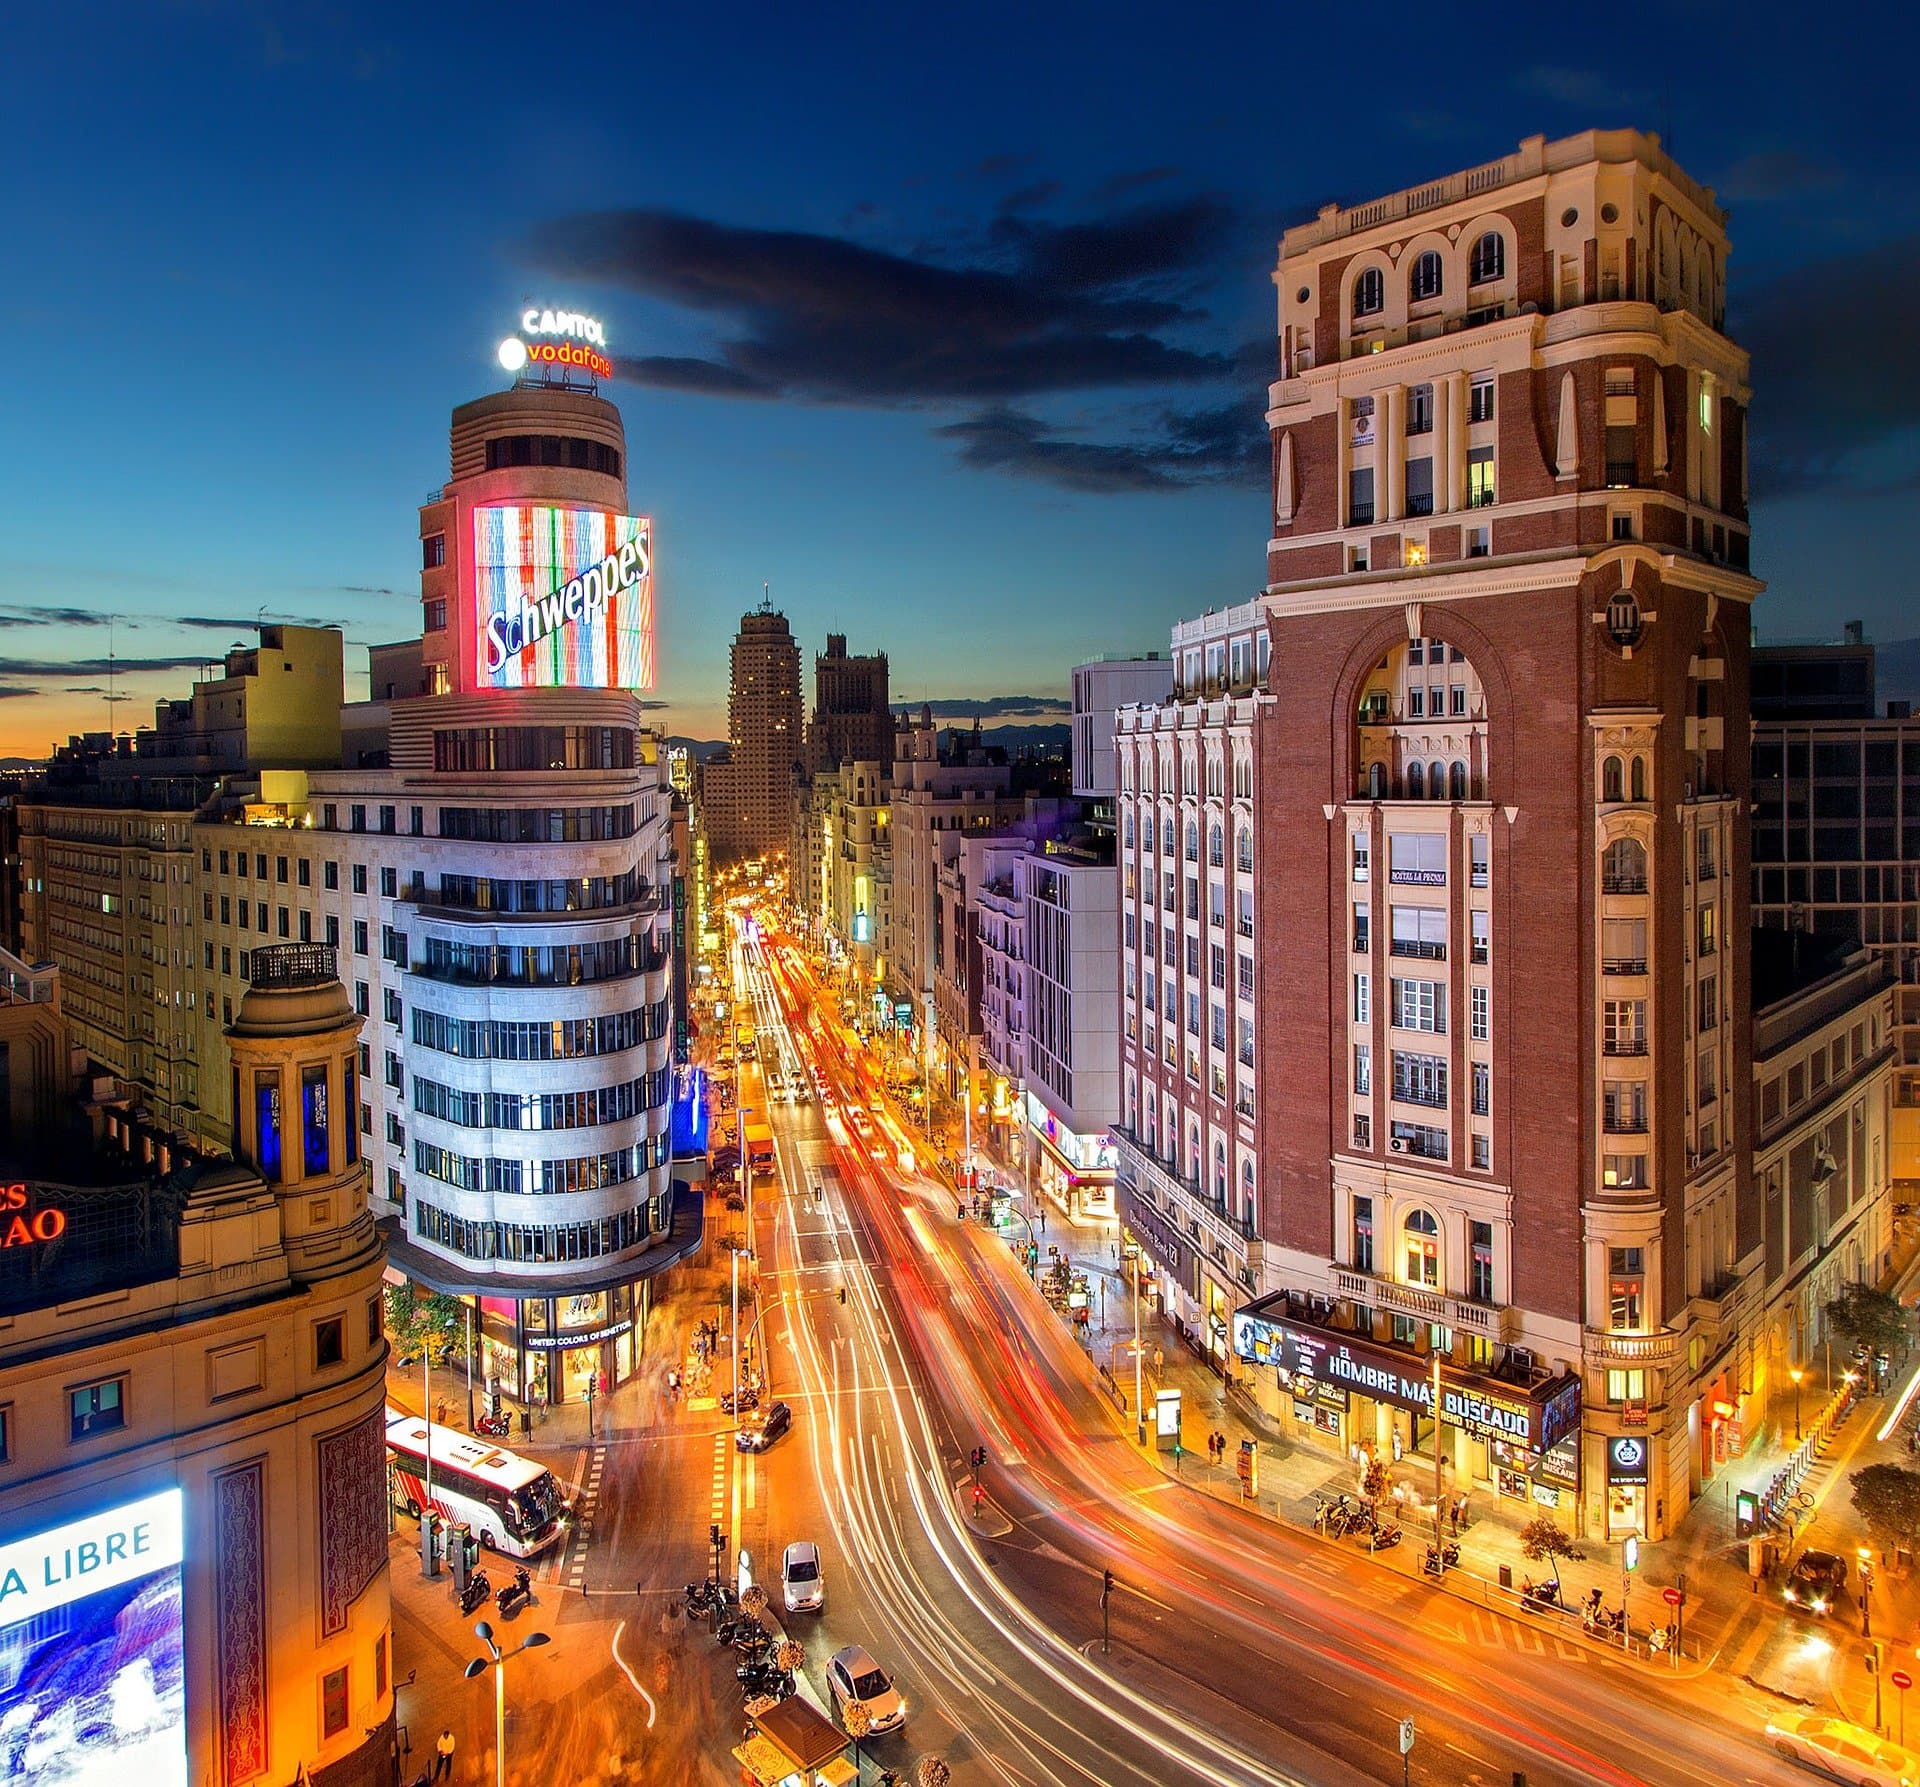 Streets to visit while in Madrid